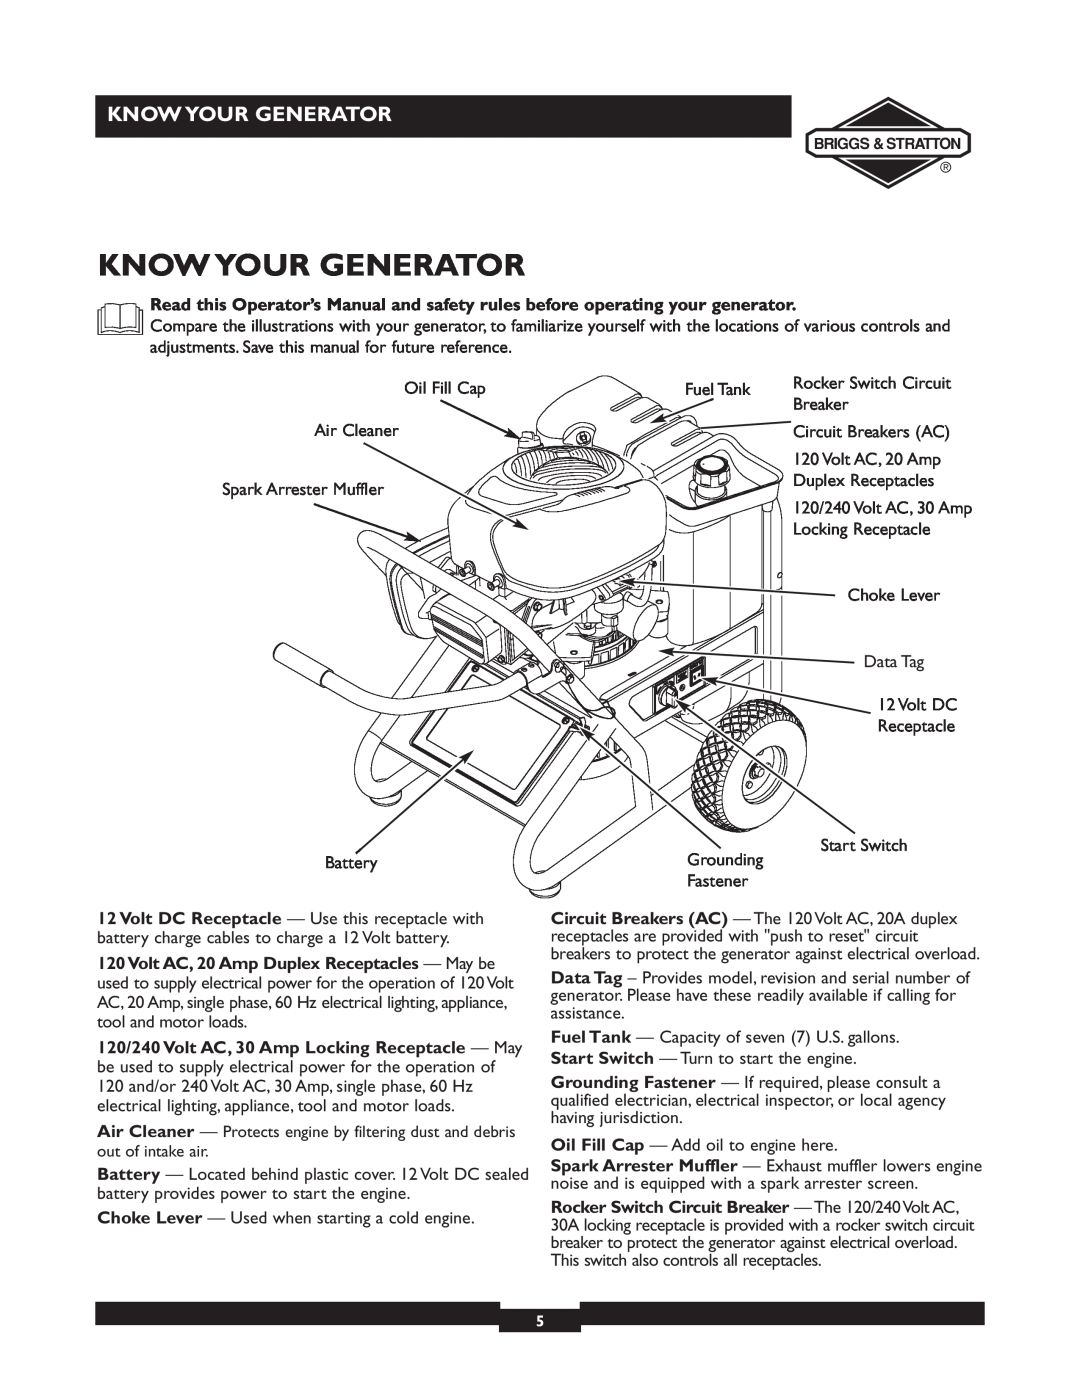 Briggs & Stratton 01894-1 manual Know Your Generator, Volt AC, 20 Amp Duplex Receptacles - May be 